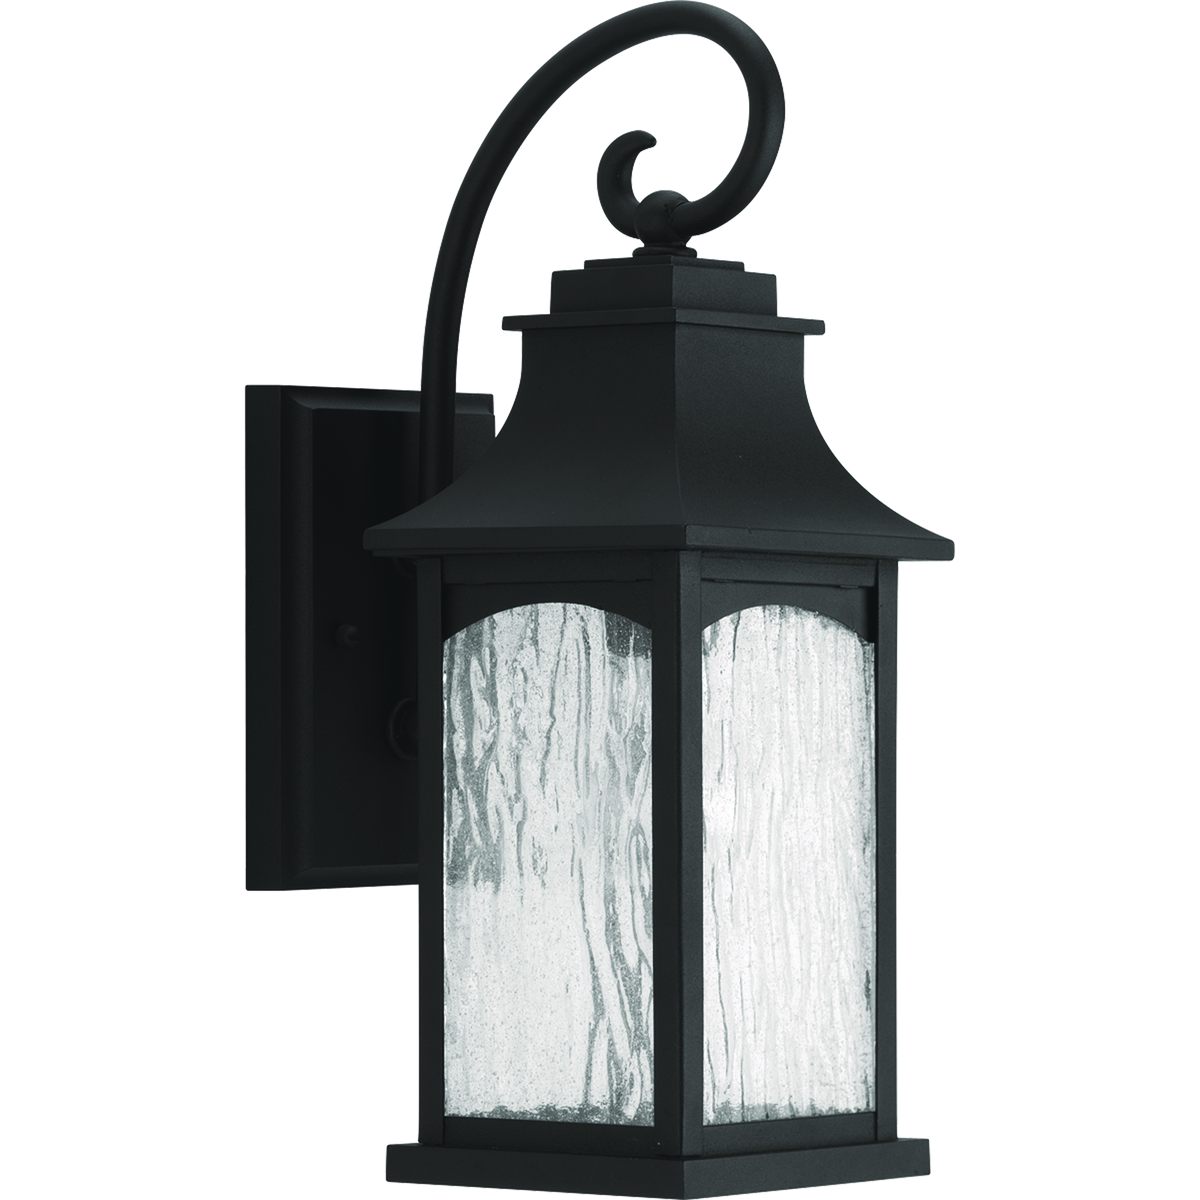 One-light small wall lantern in the Maison Collection offers traditional French country styling for a variety of home settings. Classic and formal clear water seeded glass complements the powder coat finish. Black finish.